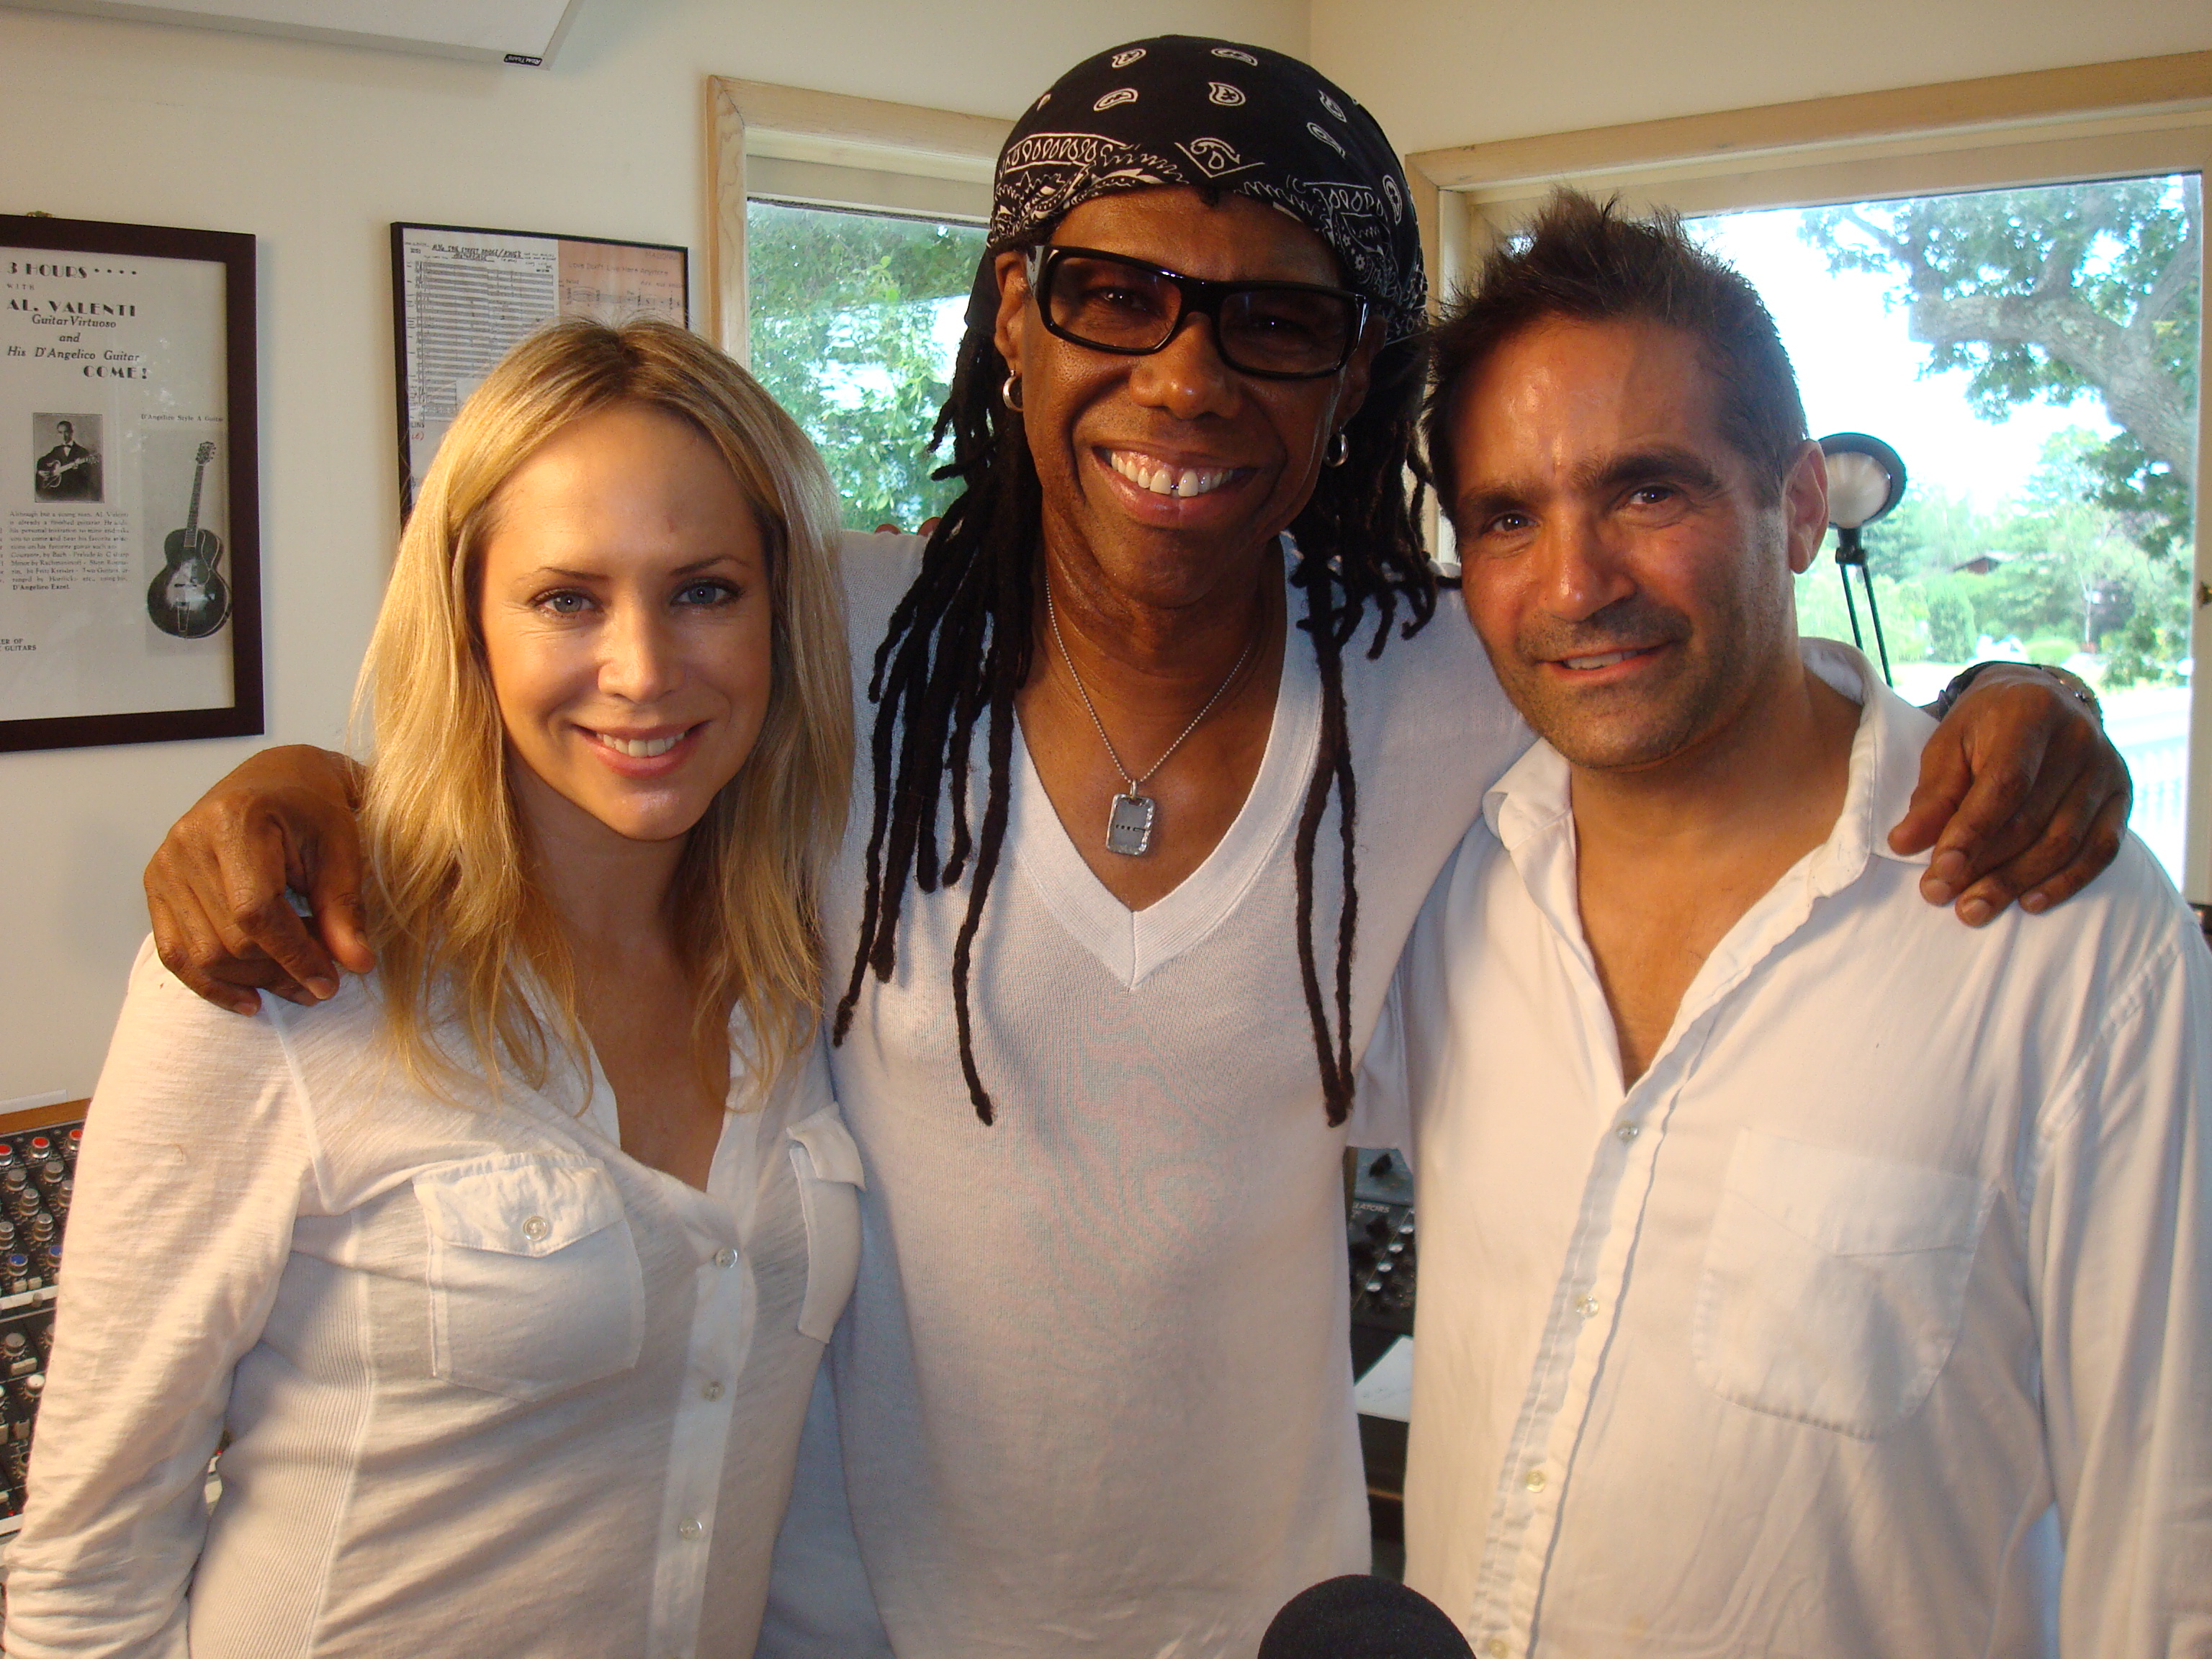 Sherrie Rose, Nile Rodgers, and Scott Taylor on set of Arthur Weinstein Documentary in Connecticut